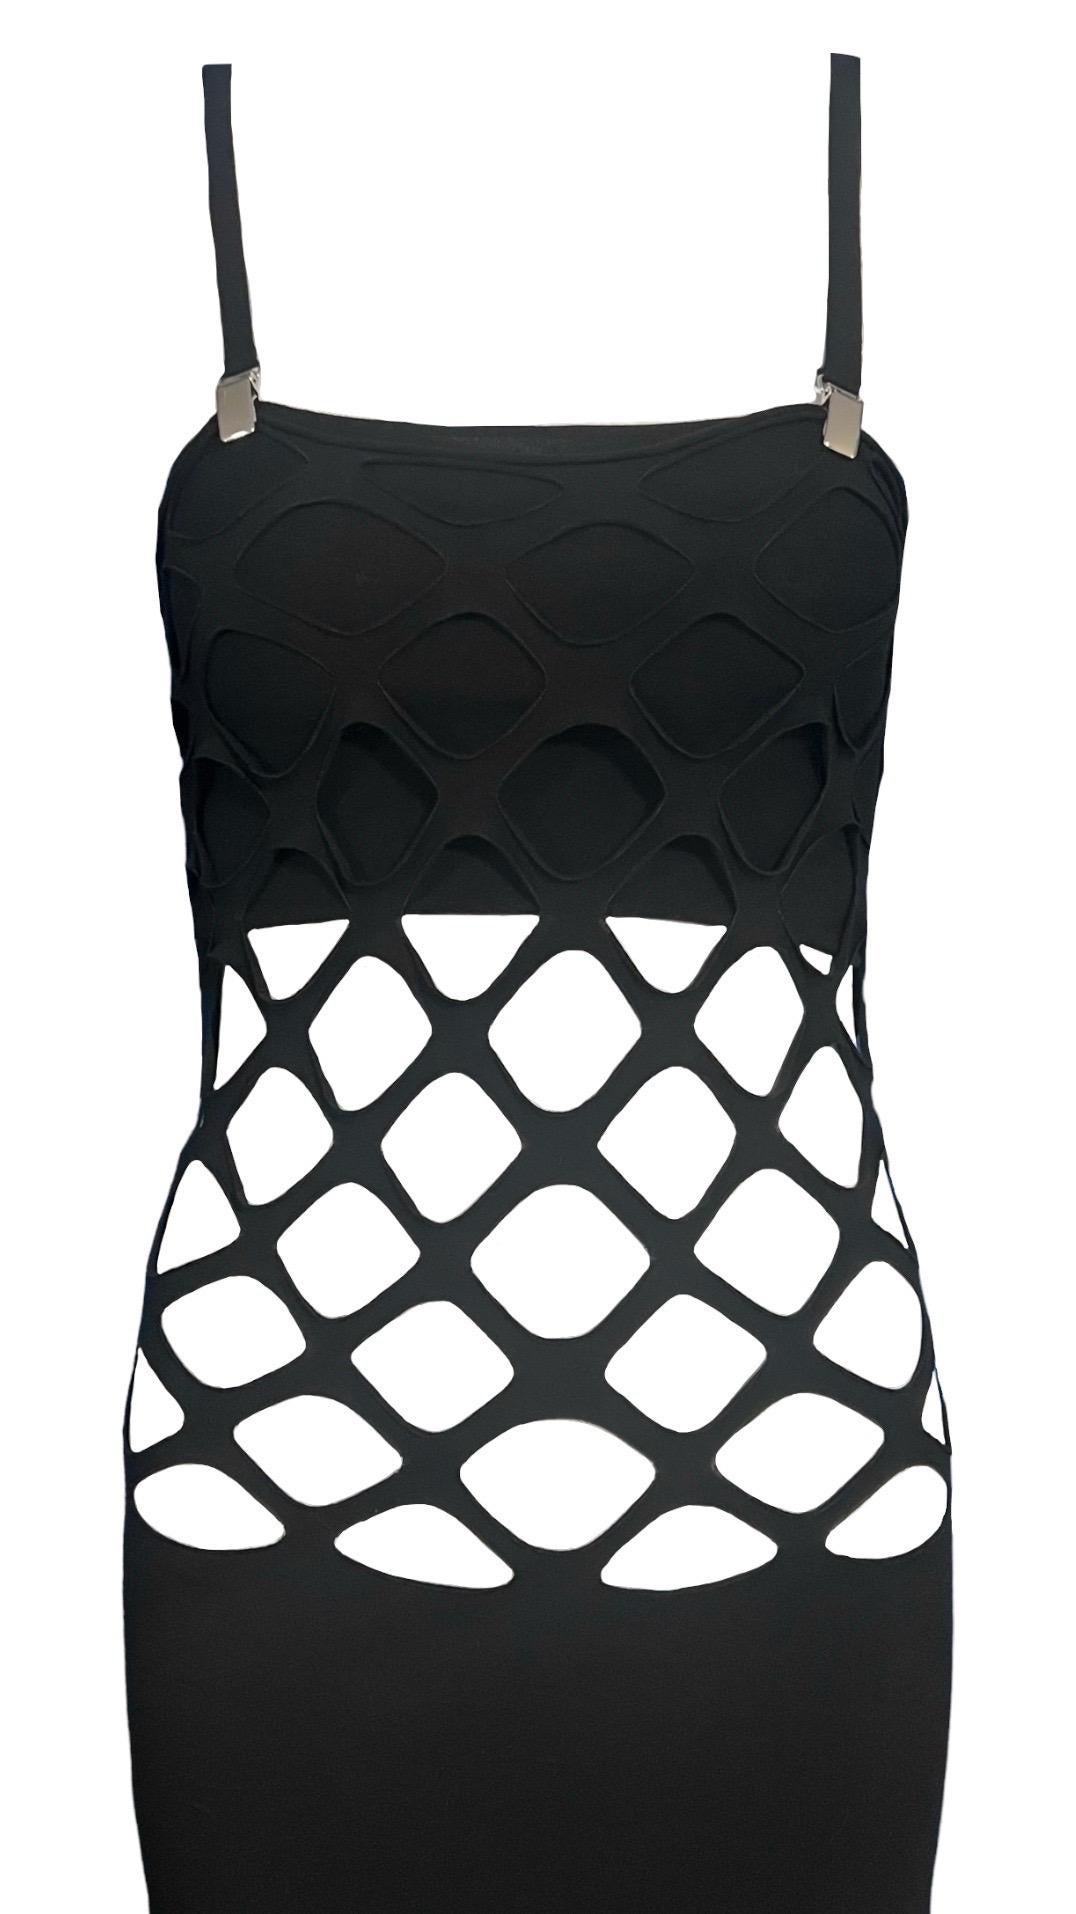 S/S 2001 Jean Paul Gaultier Soleil Black Cutout Fishnet Gown In Excellent Condition For Sale In Concord, NC